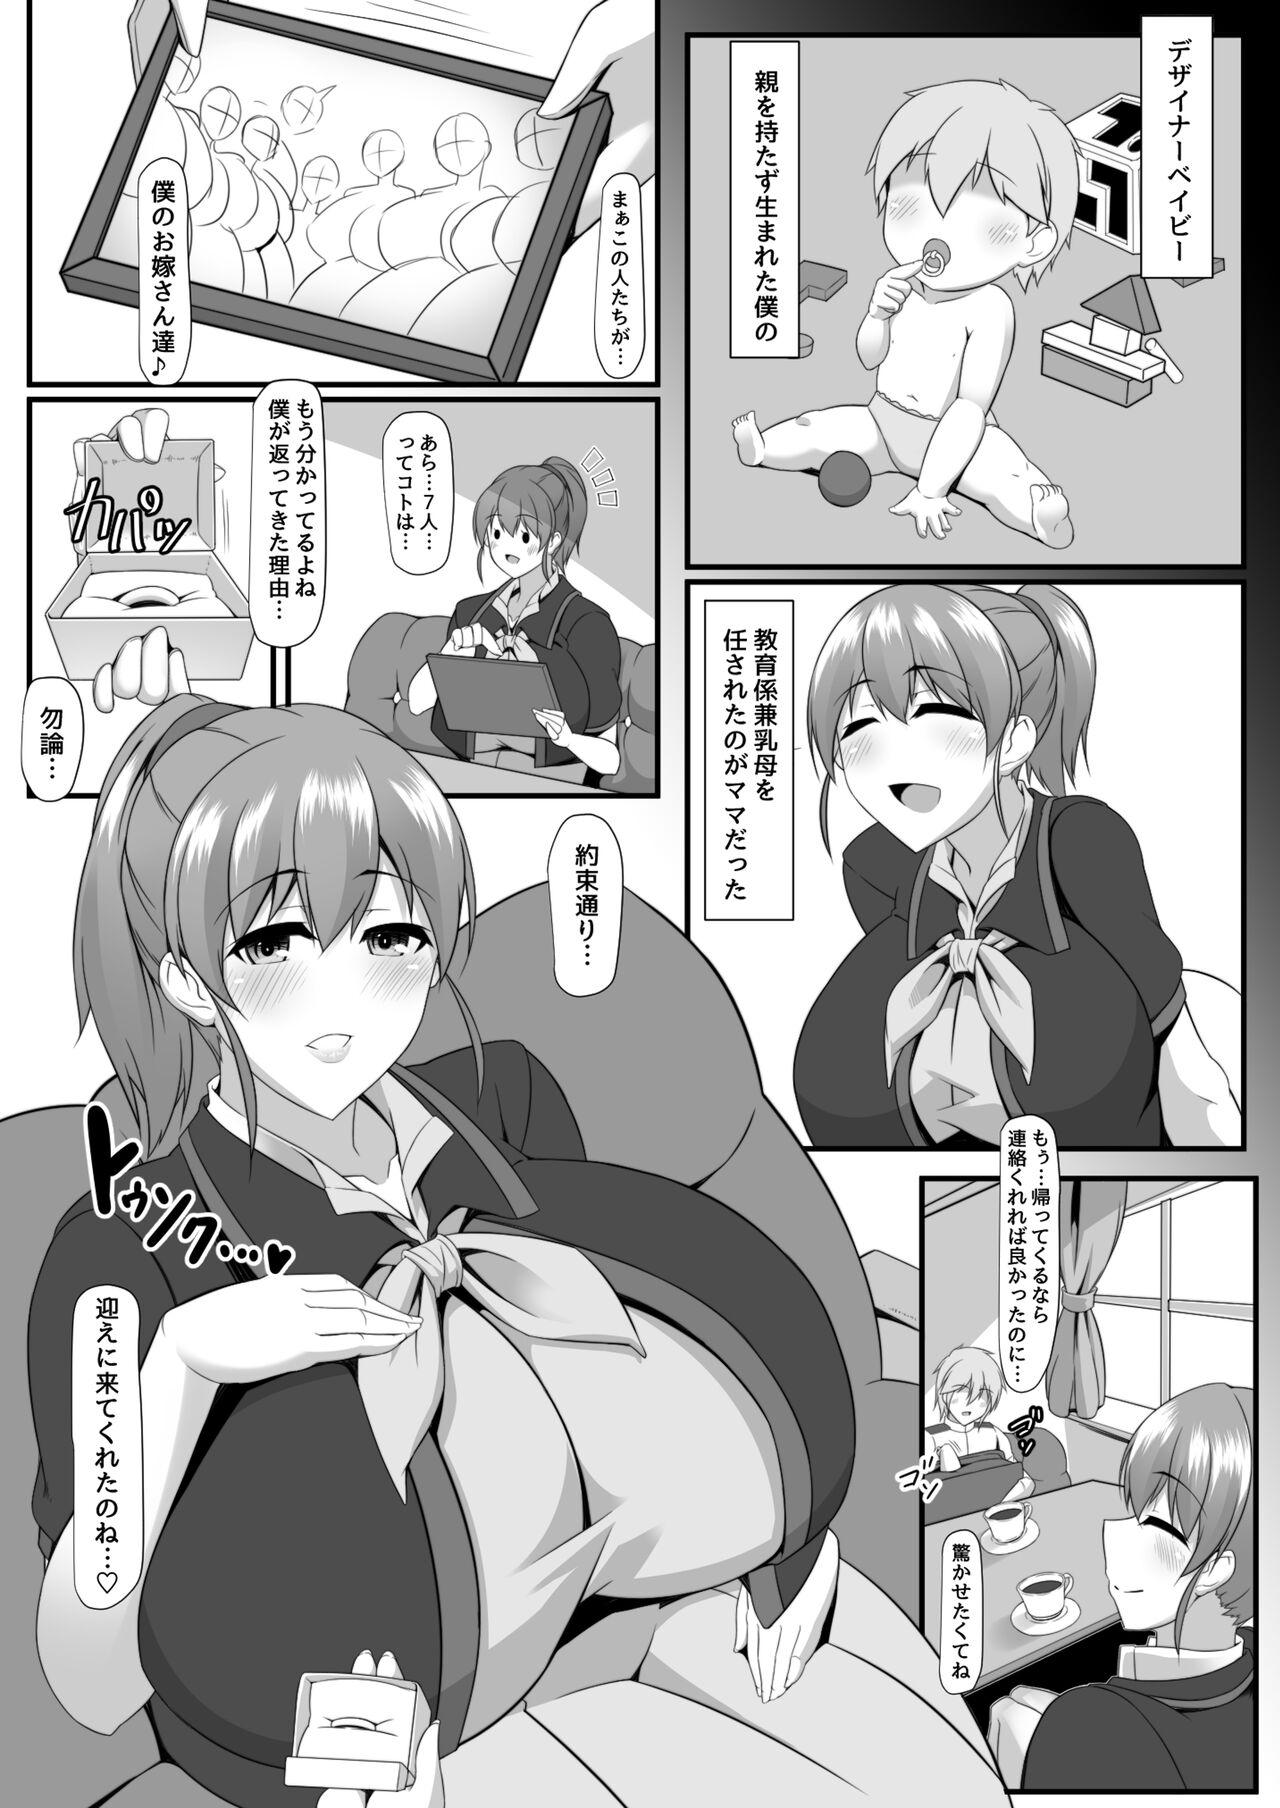 Pete Bote Colle 10 - Kantai collection Busty - Page 4